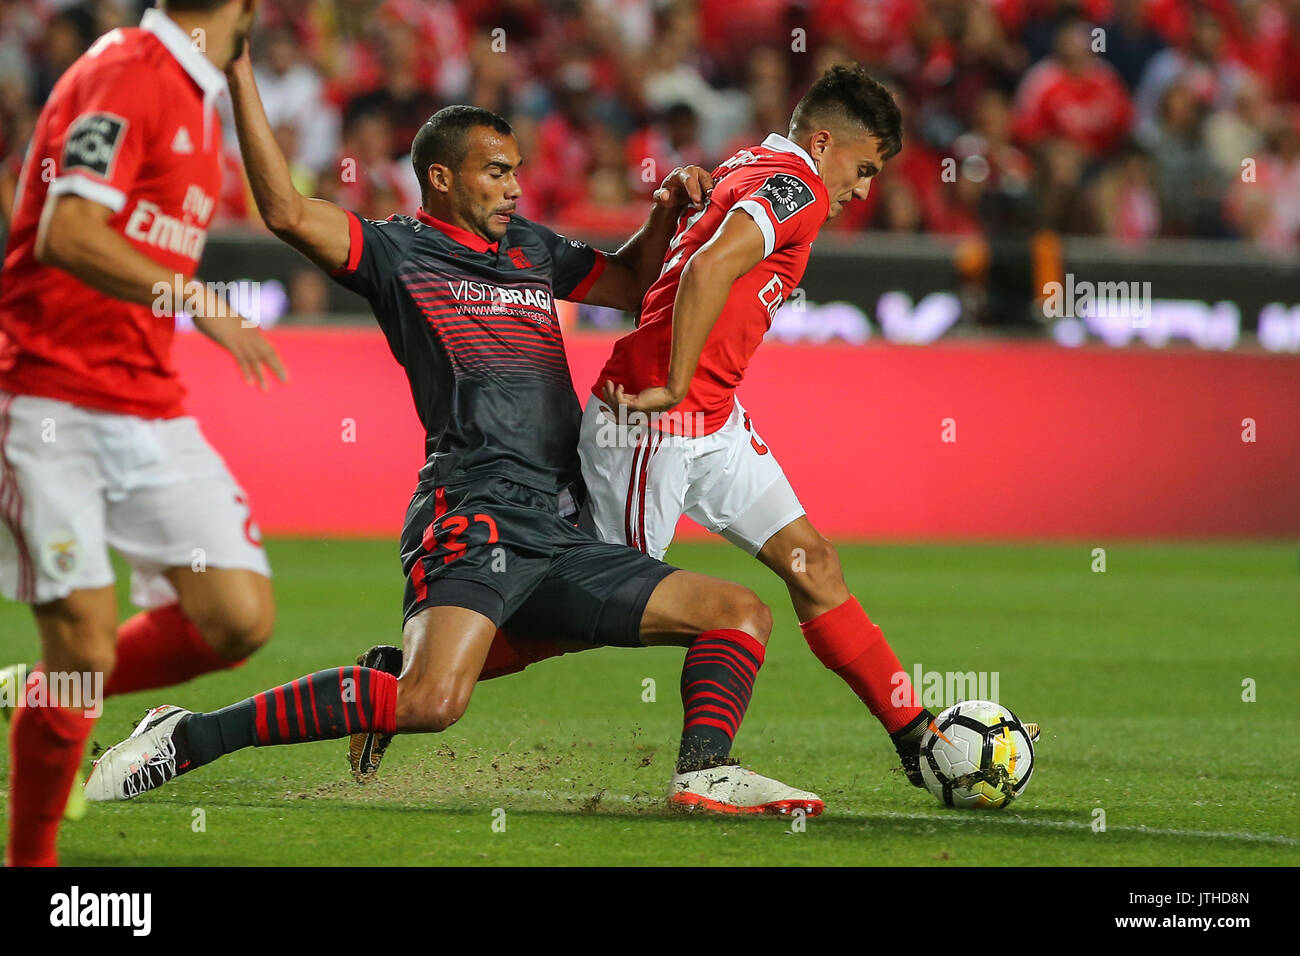 Lisbon, Portugal. 09th Aug, 2017. Benfica«s forward Franco Cervi from Argentina (R) and Braga«s midfielder Fransegio from Brazil (L) during the Premier League 2017/18 match between SL Benfica v SC Braga, at Luz Stadium in Lisbon on August 9, 2017. Credit: Bruno Barros/Alamy Live News Stock Photo